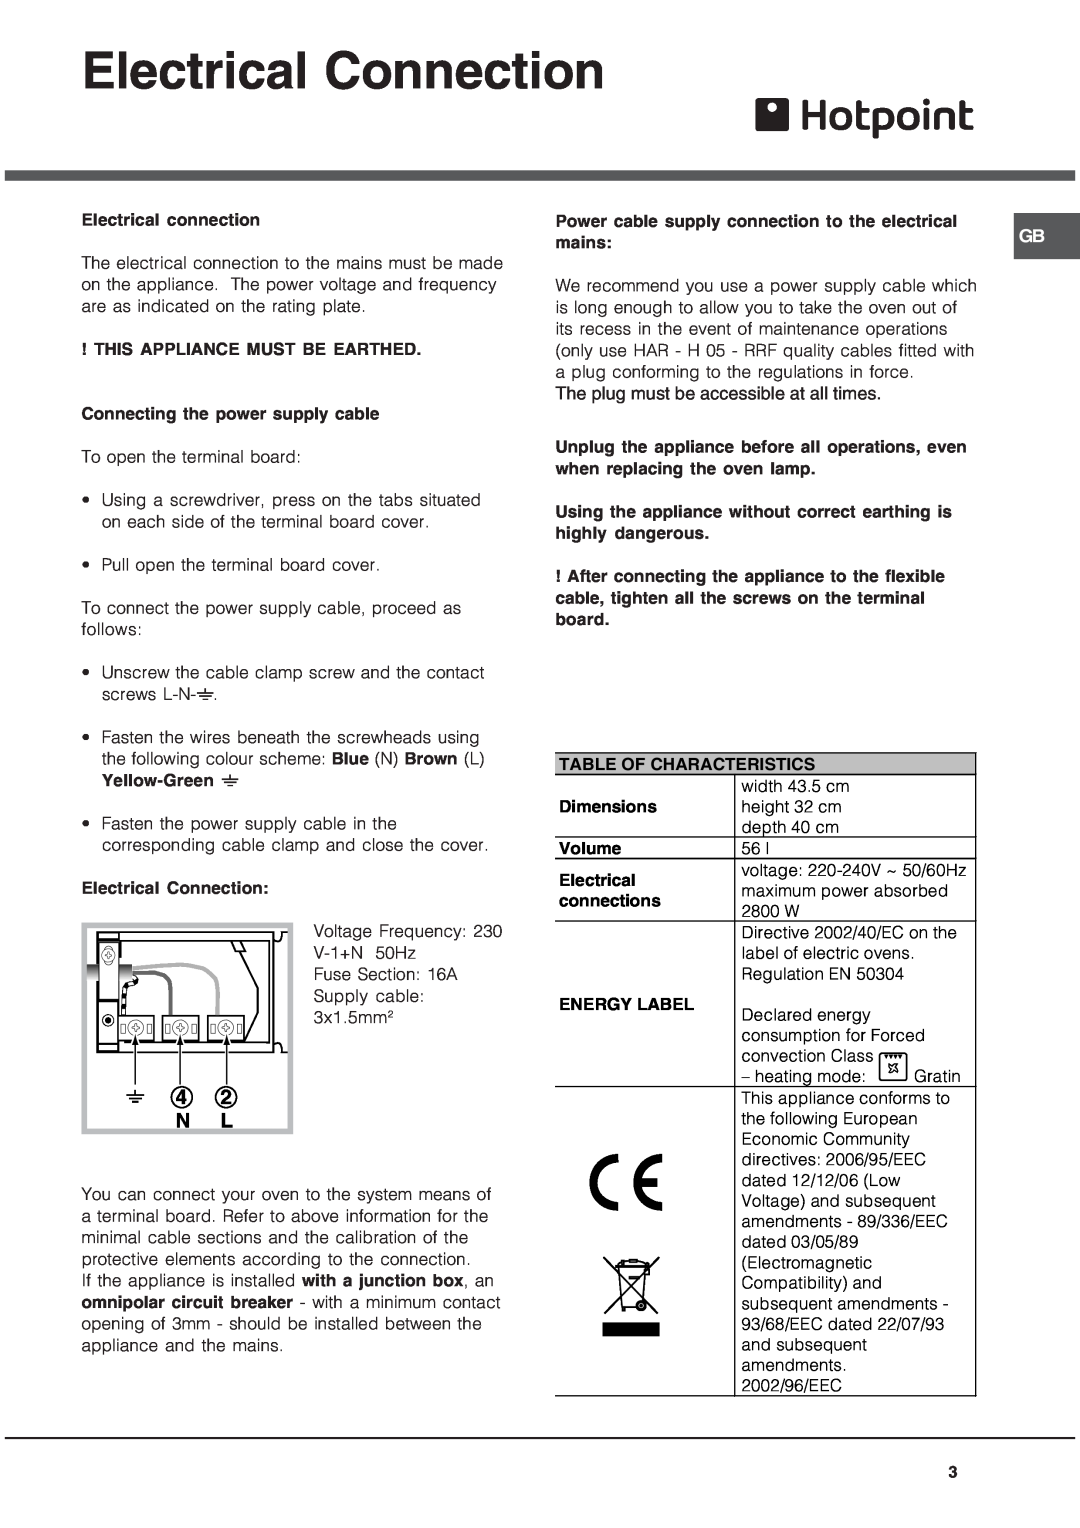 Hotpoint SE1032X operating instructions Electrical Connection, 4 2 N L, The plug must be accessible at all times 